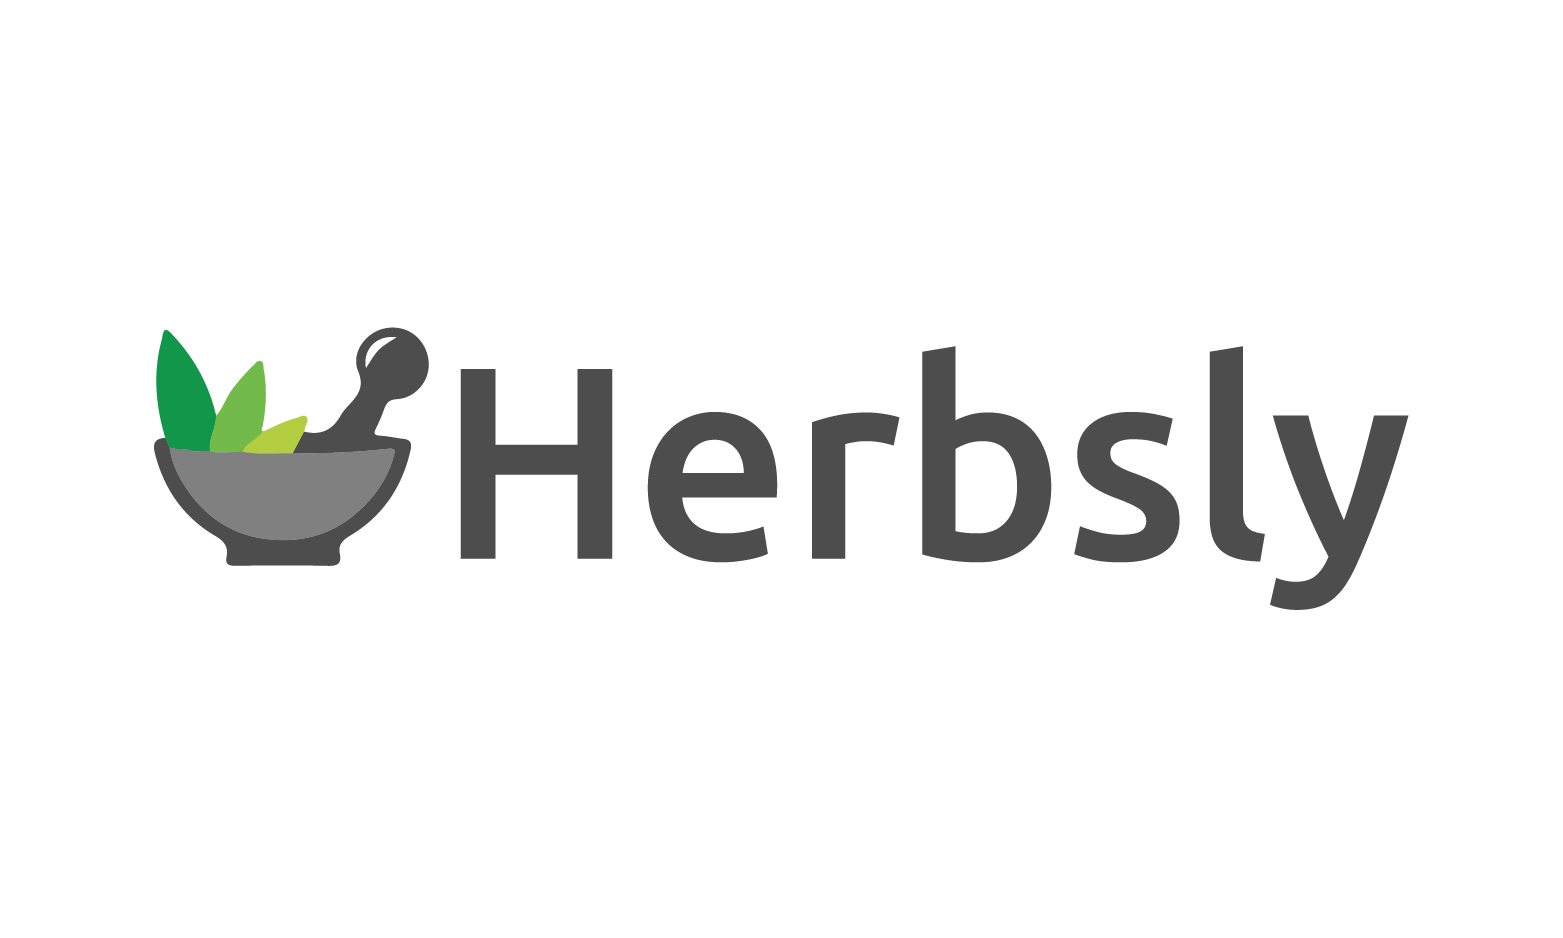 Herbsly.com - Creative brandable domain for sale